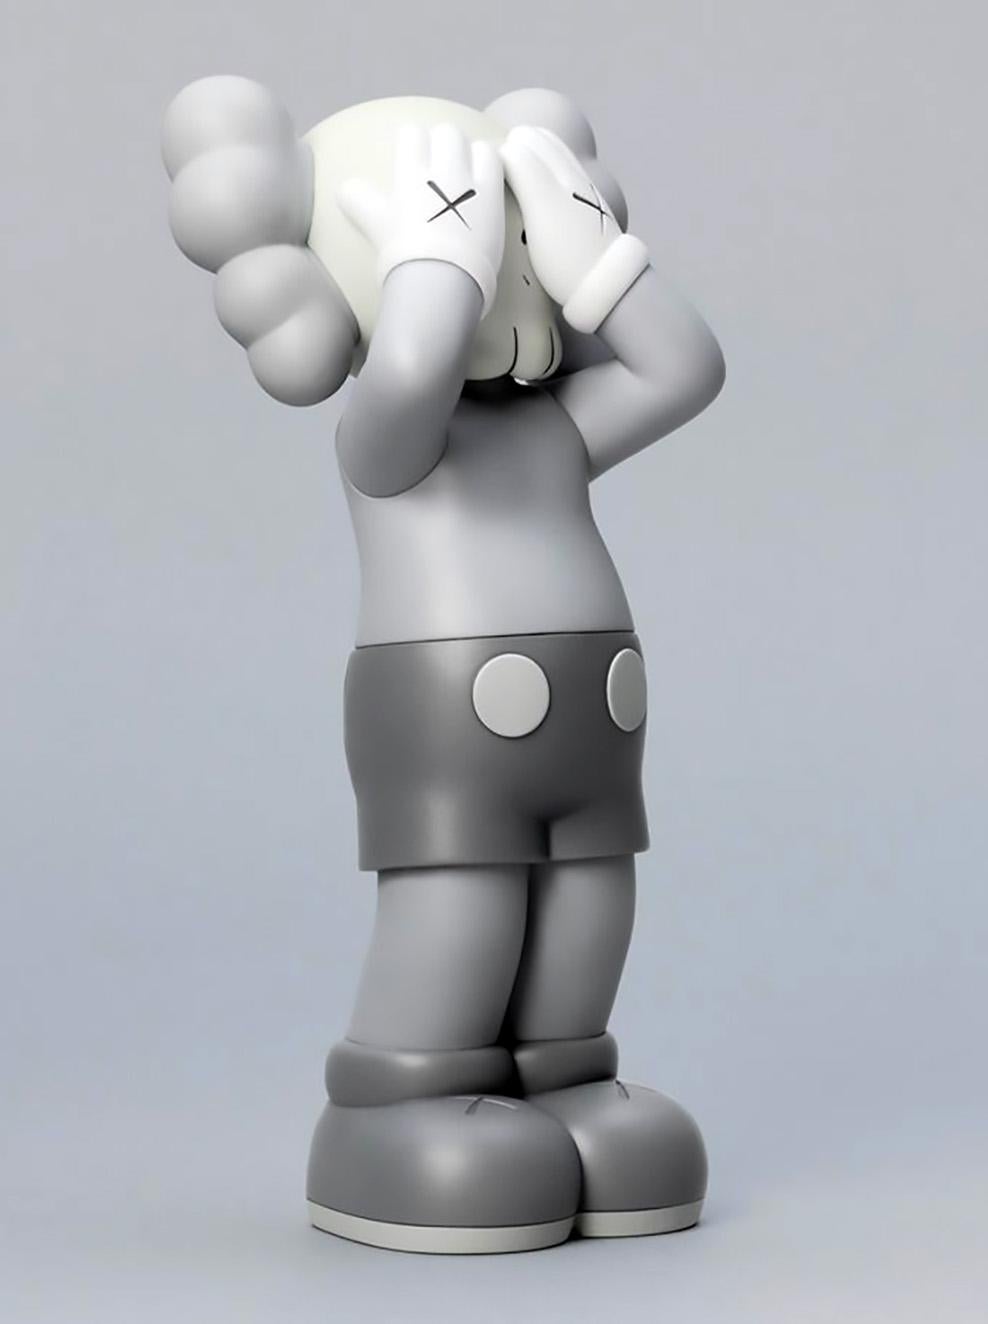 What is so special about KAWS?